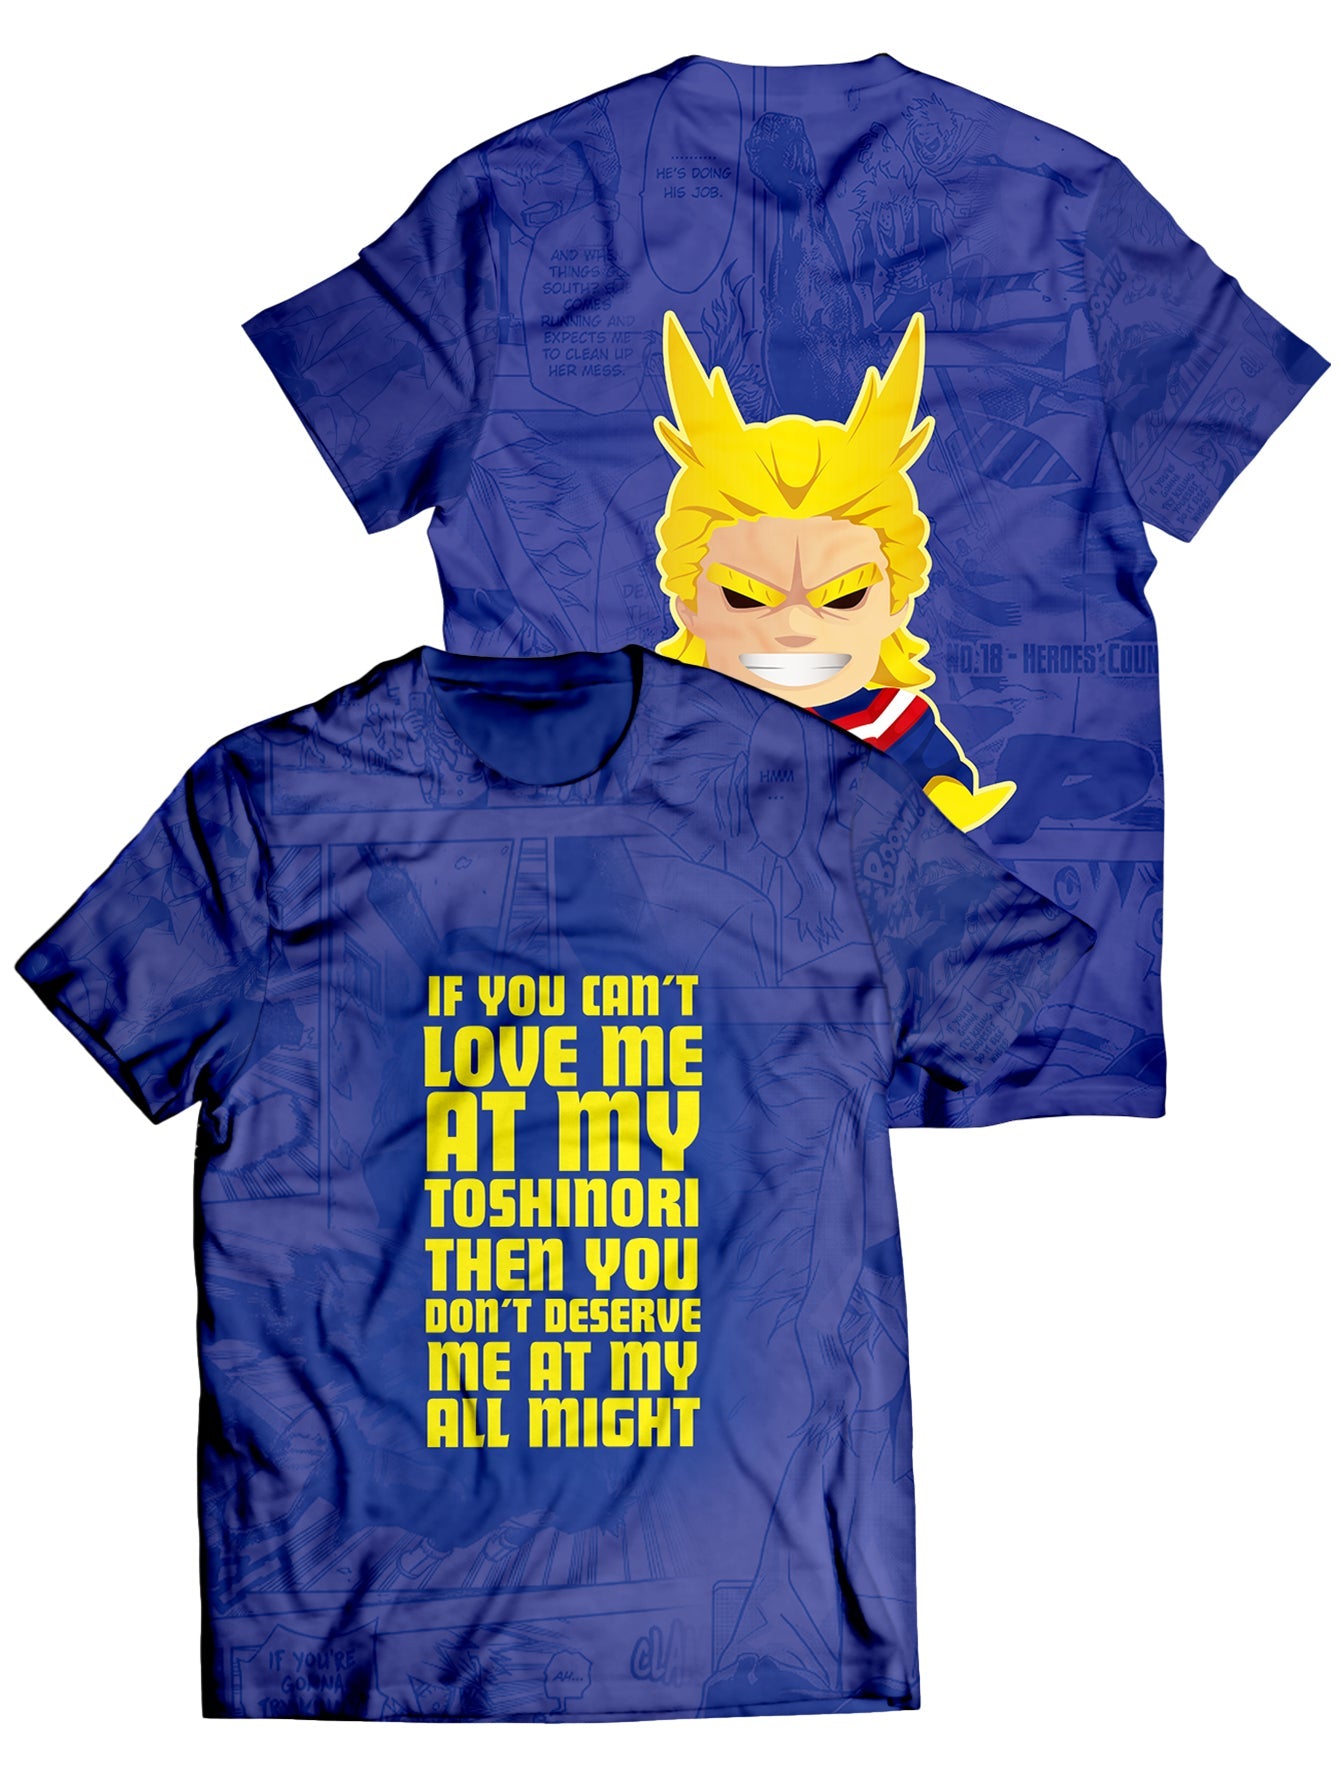 Fandomaniax - You Don't Deserve Me at My All Might Unisex T-Shirt